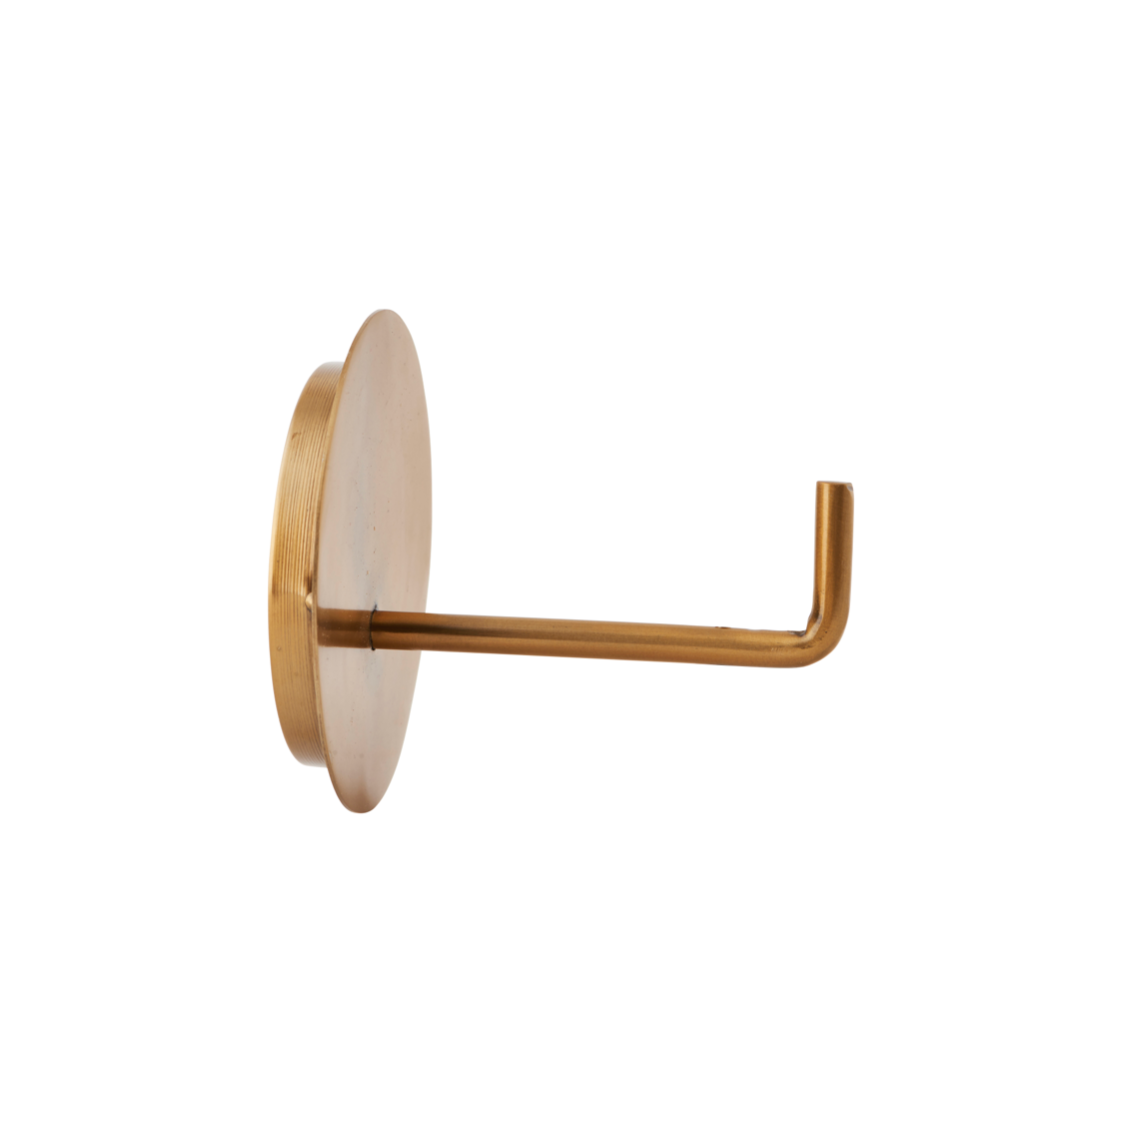 modern toilet roll holder made from iron, with a brass finish